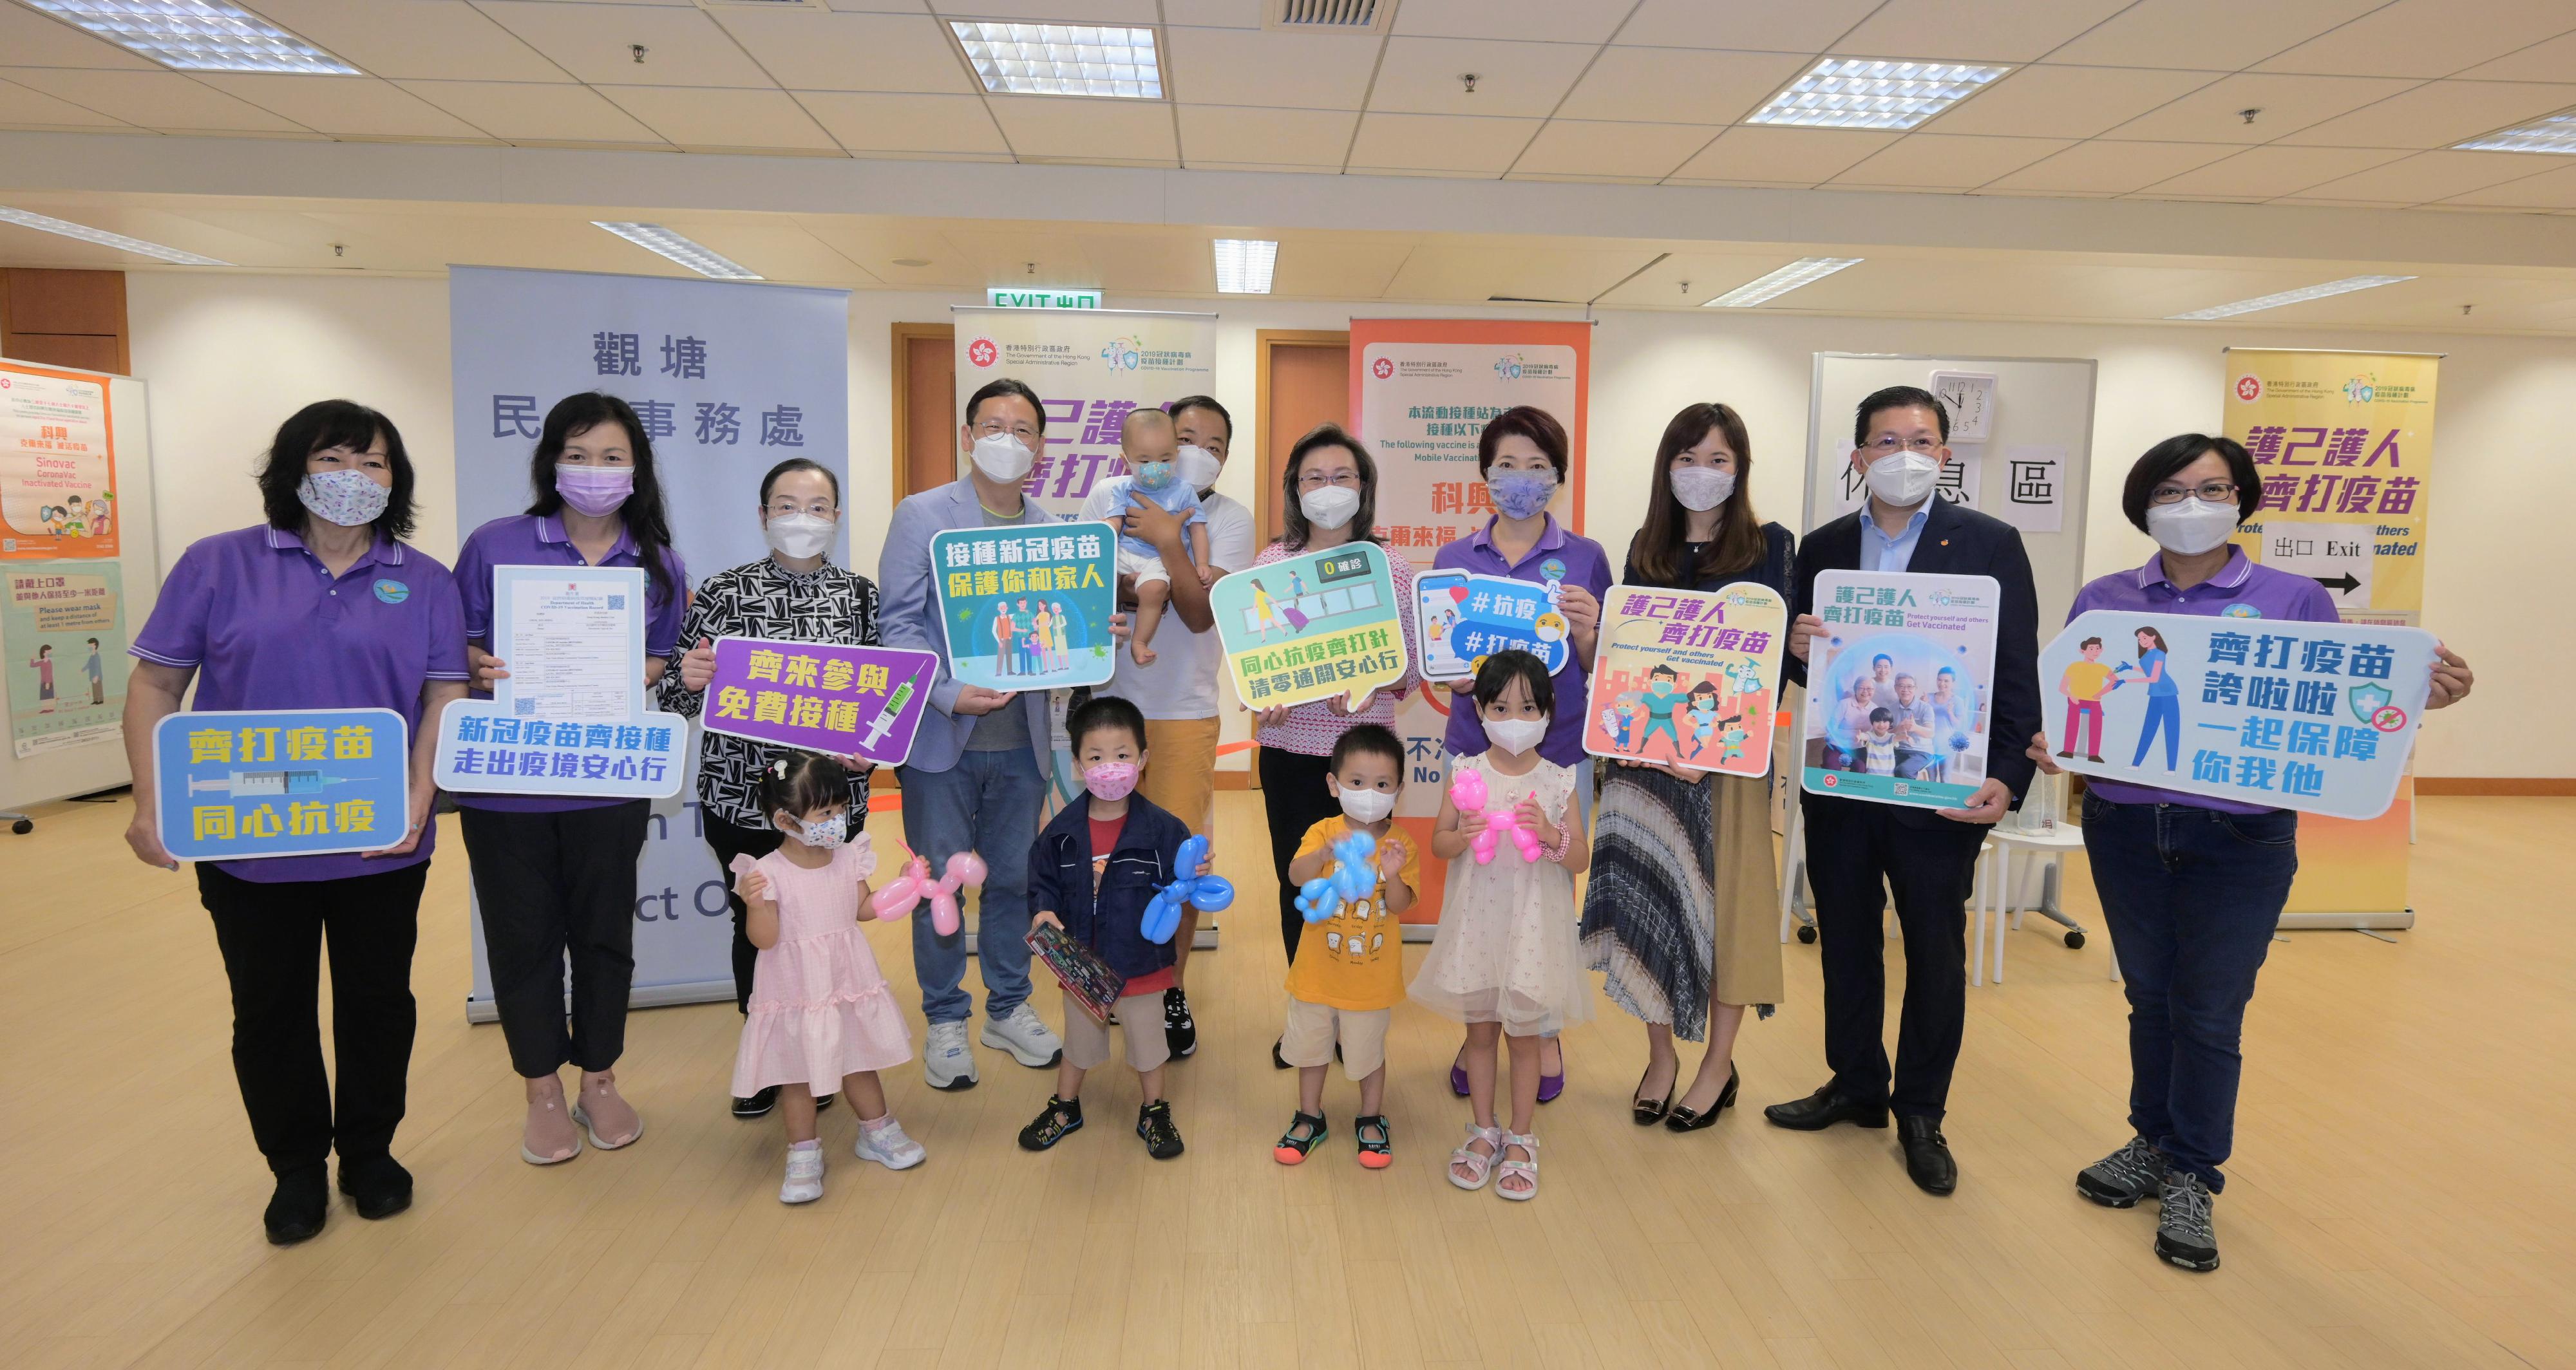 Children aged from 6 months to 3 years may receive the Sinovac vaccine starting from today (August 4). The Secretary for the Civil Service, Mrs Ingrid Yeung, visited a Community Vaccination Centre in Kwun Tong today. Photo shows Mrs Yeung (back row, fifth right), with representatives from the Home Affairs Department and the Kwun Tong District Office, members of the local community and parents, expressing support for COVID-19 vaccination.